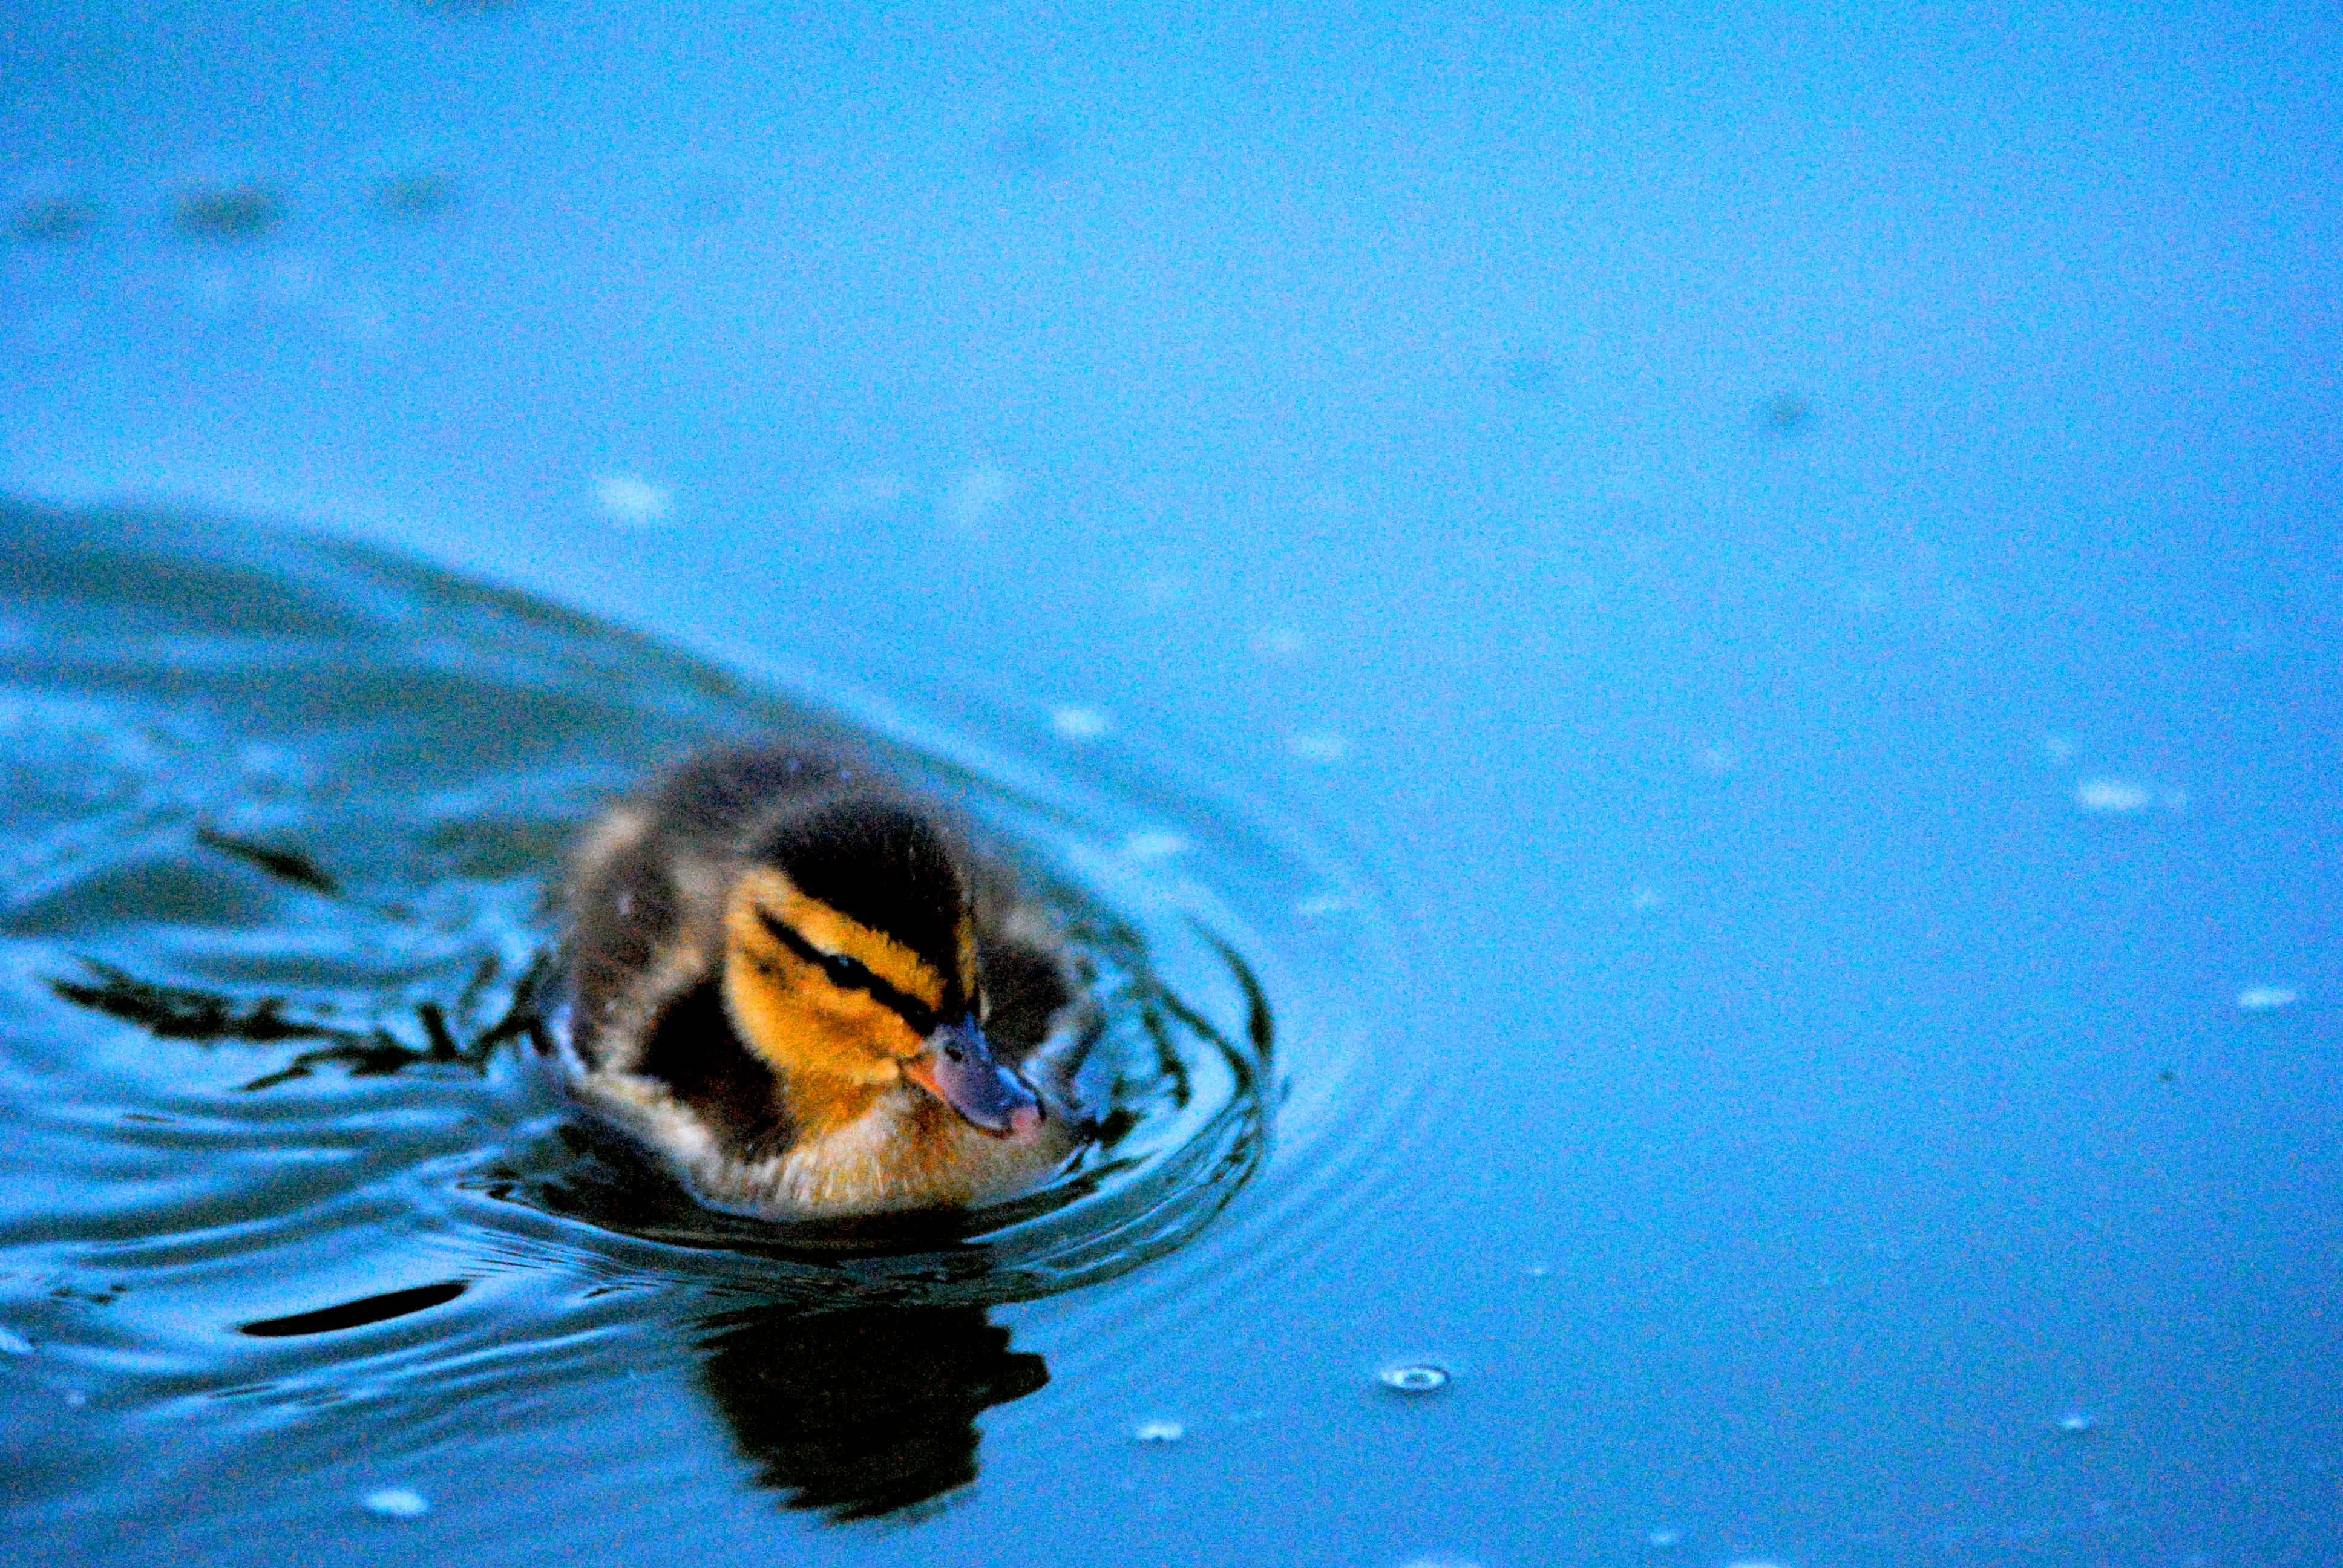 Duckling swimming in blue water.